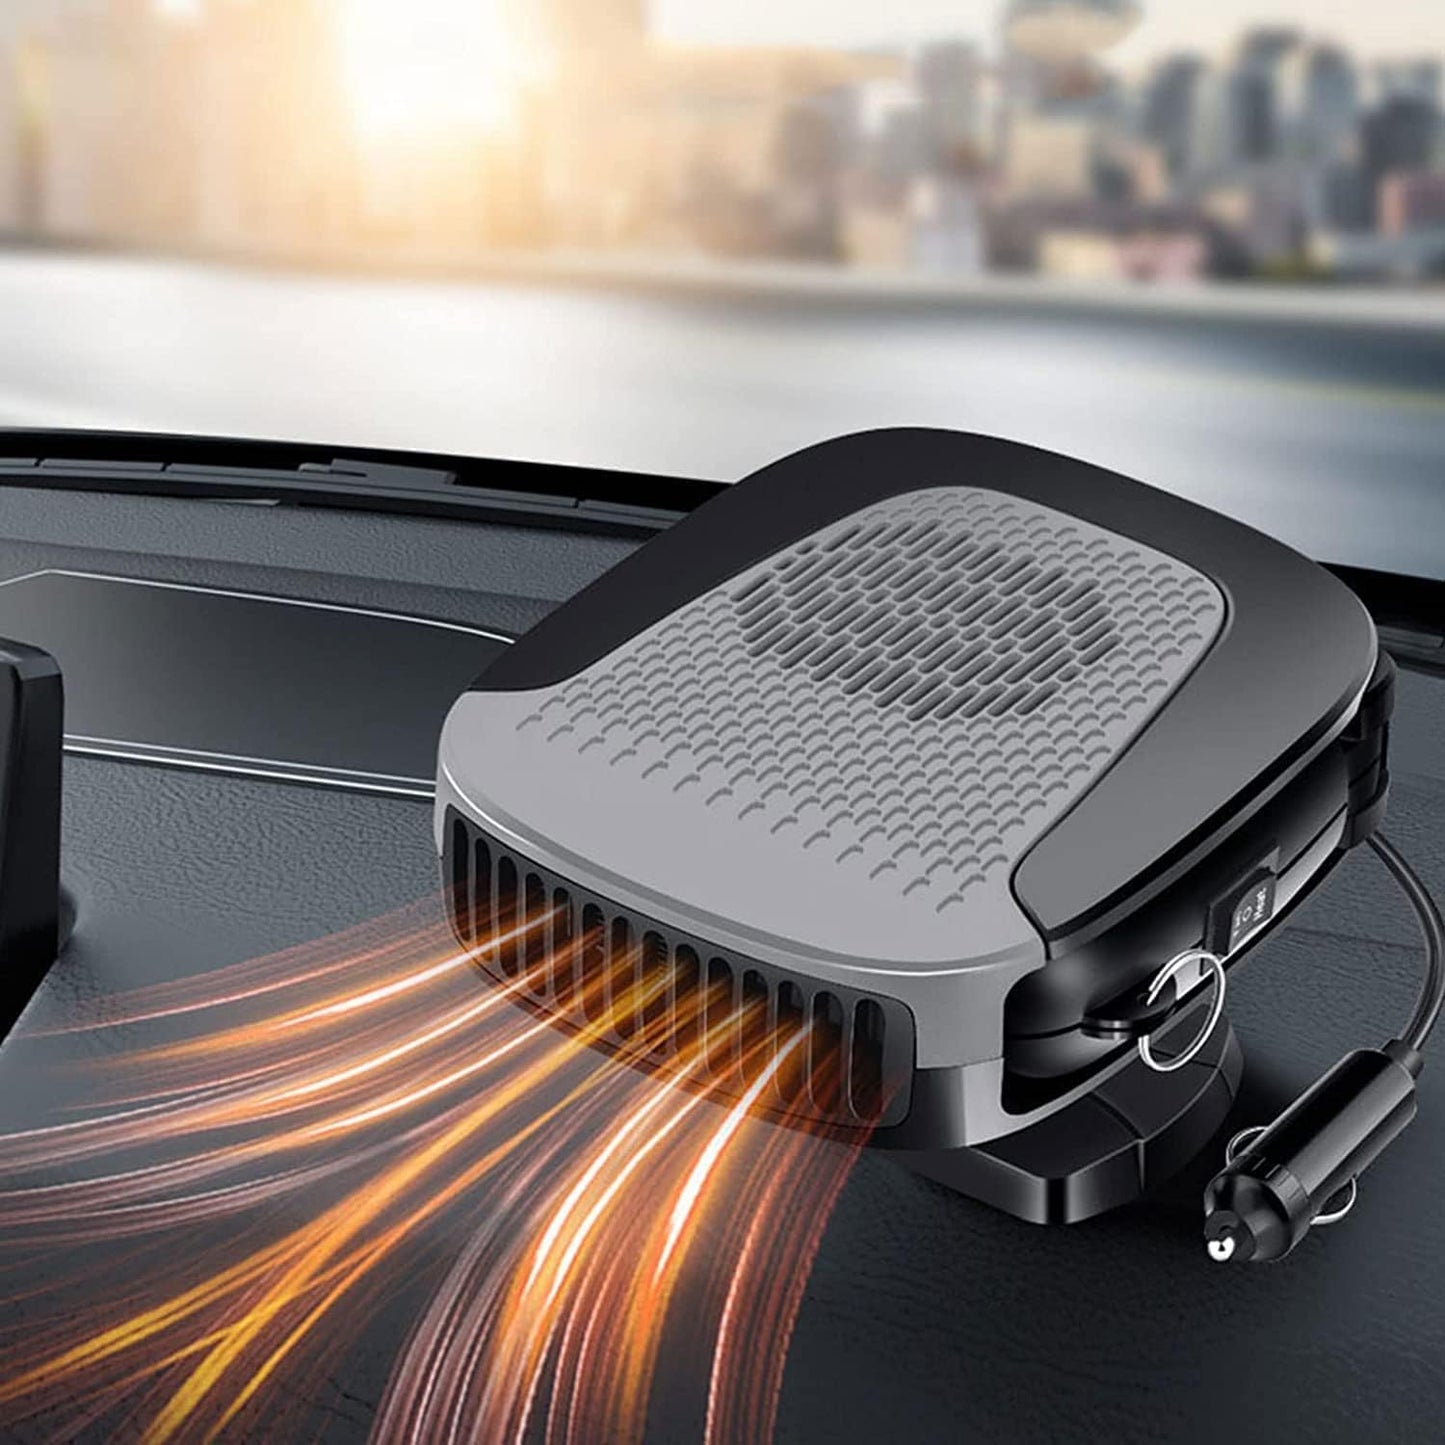 Car Heater 2 in 1 Thermal Heating Cooling Portable Fans